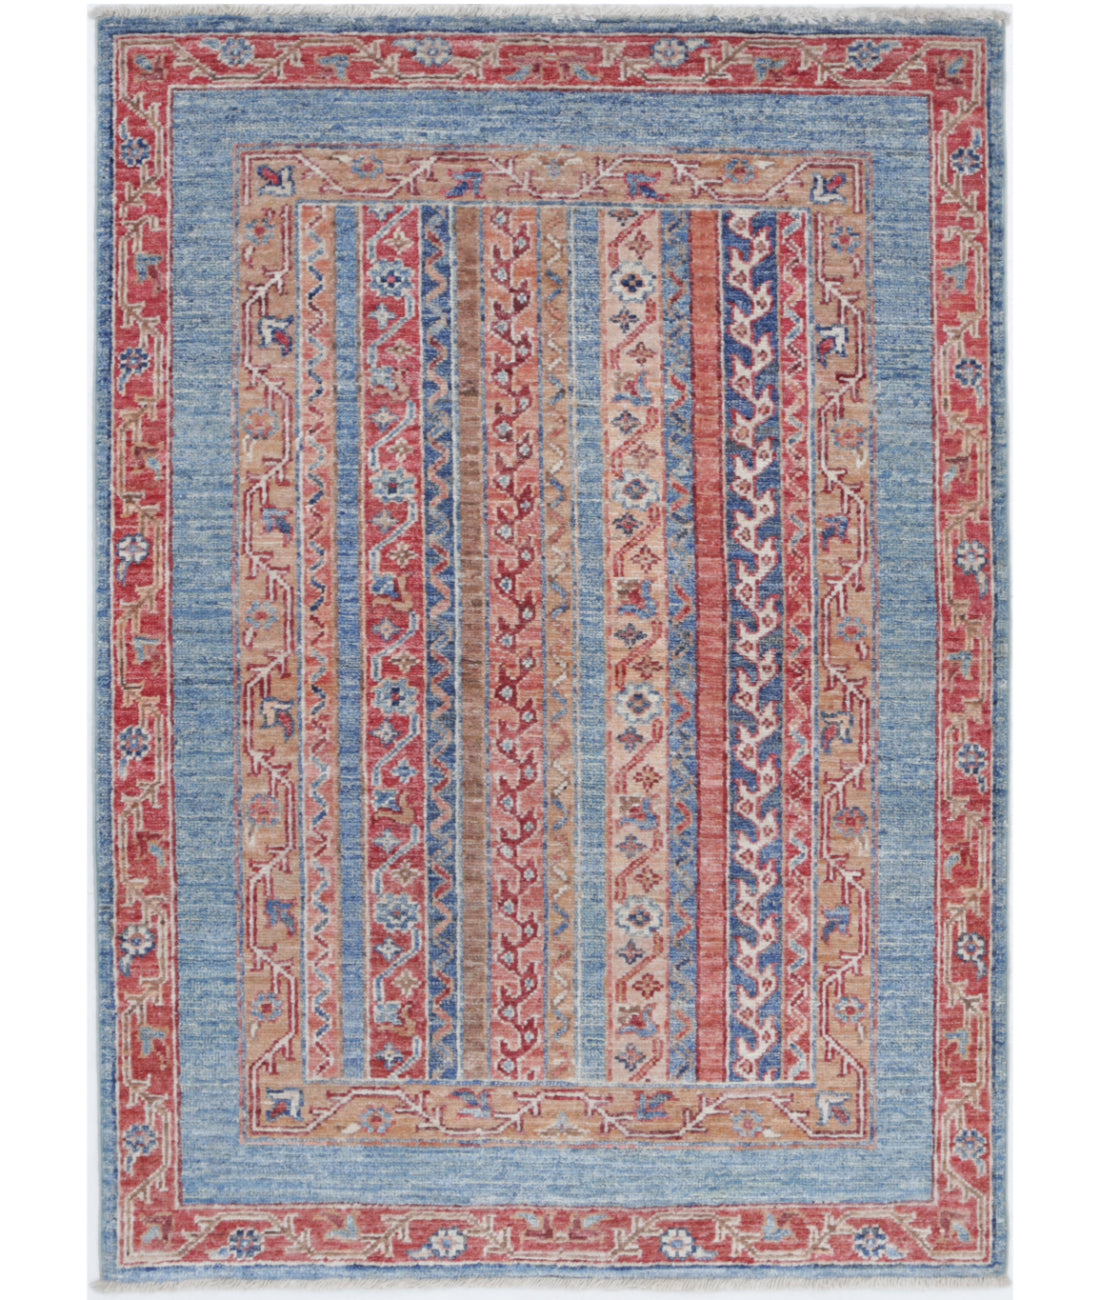 Hand Knotted Shaal Wool Rug - 2'9'' x 3'11'' 2'9'' x 3'11'' (83 X 118) / Multi / Multi